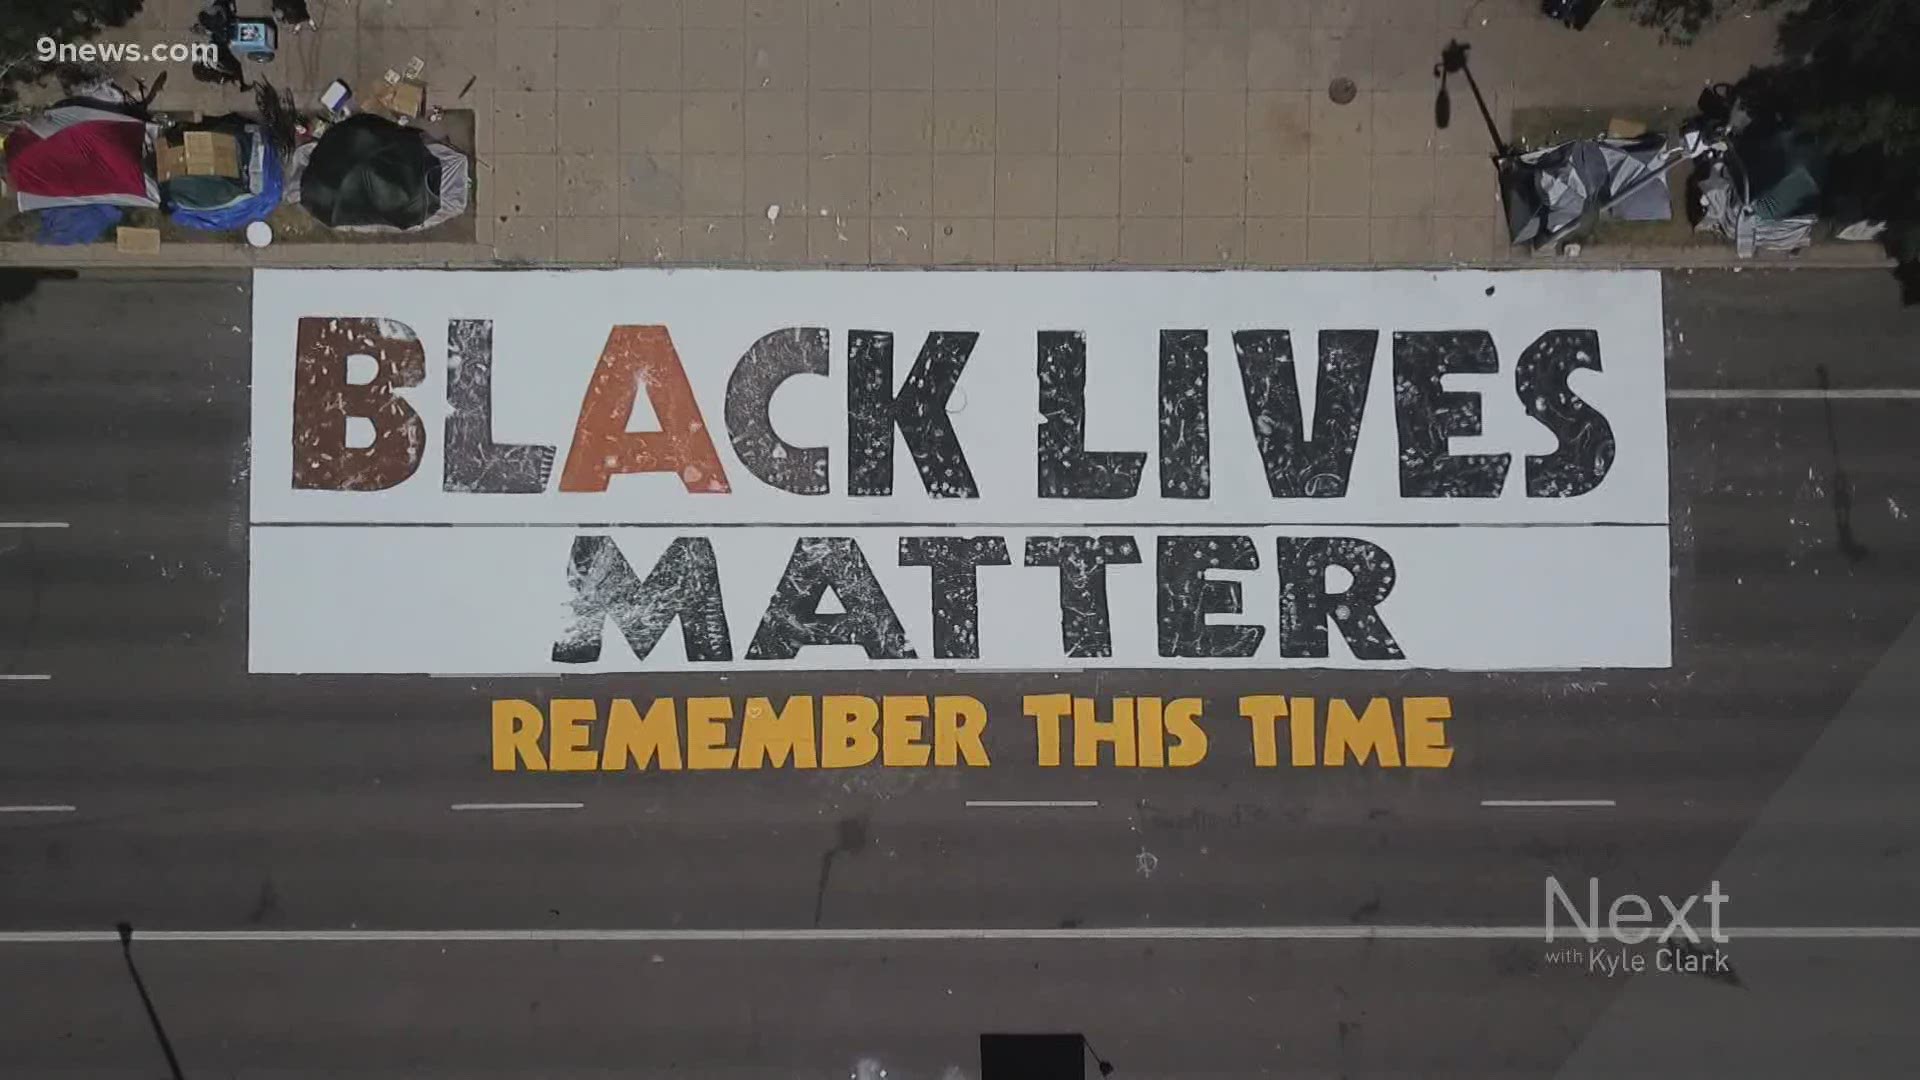 Denver closed part of Broadway, near the Colorado state Capitol, to allow local artists to paint a Black Lives Matter street mural. It was designed by Adri Norris.